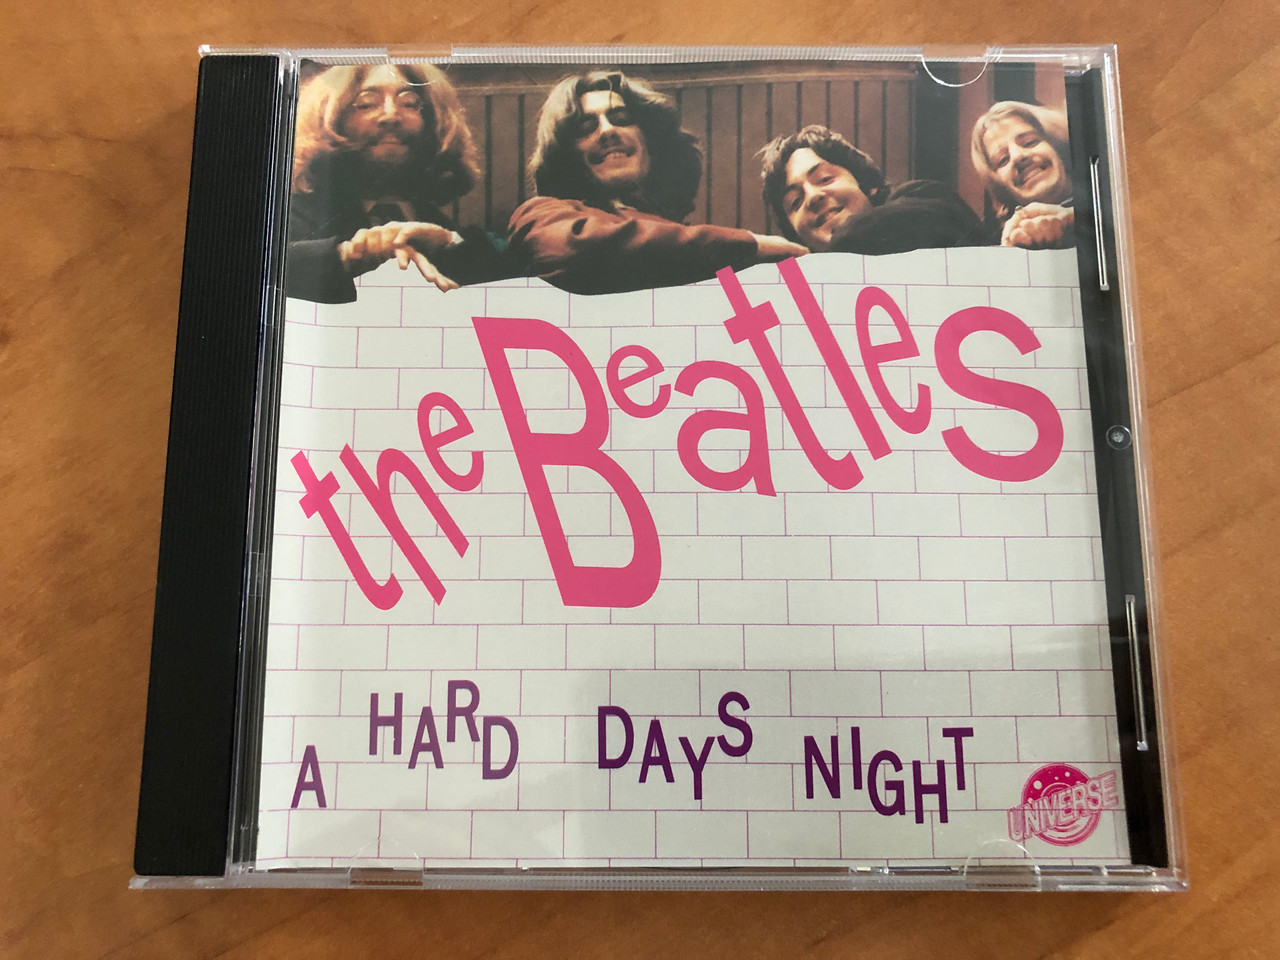 https://cdn10.bigcommerce.com/s-62bdpkt7pb/products/30847/images/181991/The_Beatles_A_Hard_Days_Night_Universe_Audio_CD_1993_Stereo_UN_4_014_1__34231.1624019218.1280.1280.JPG?c=2